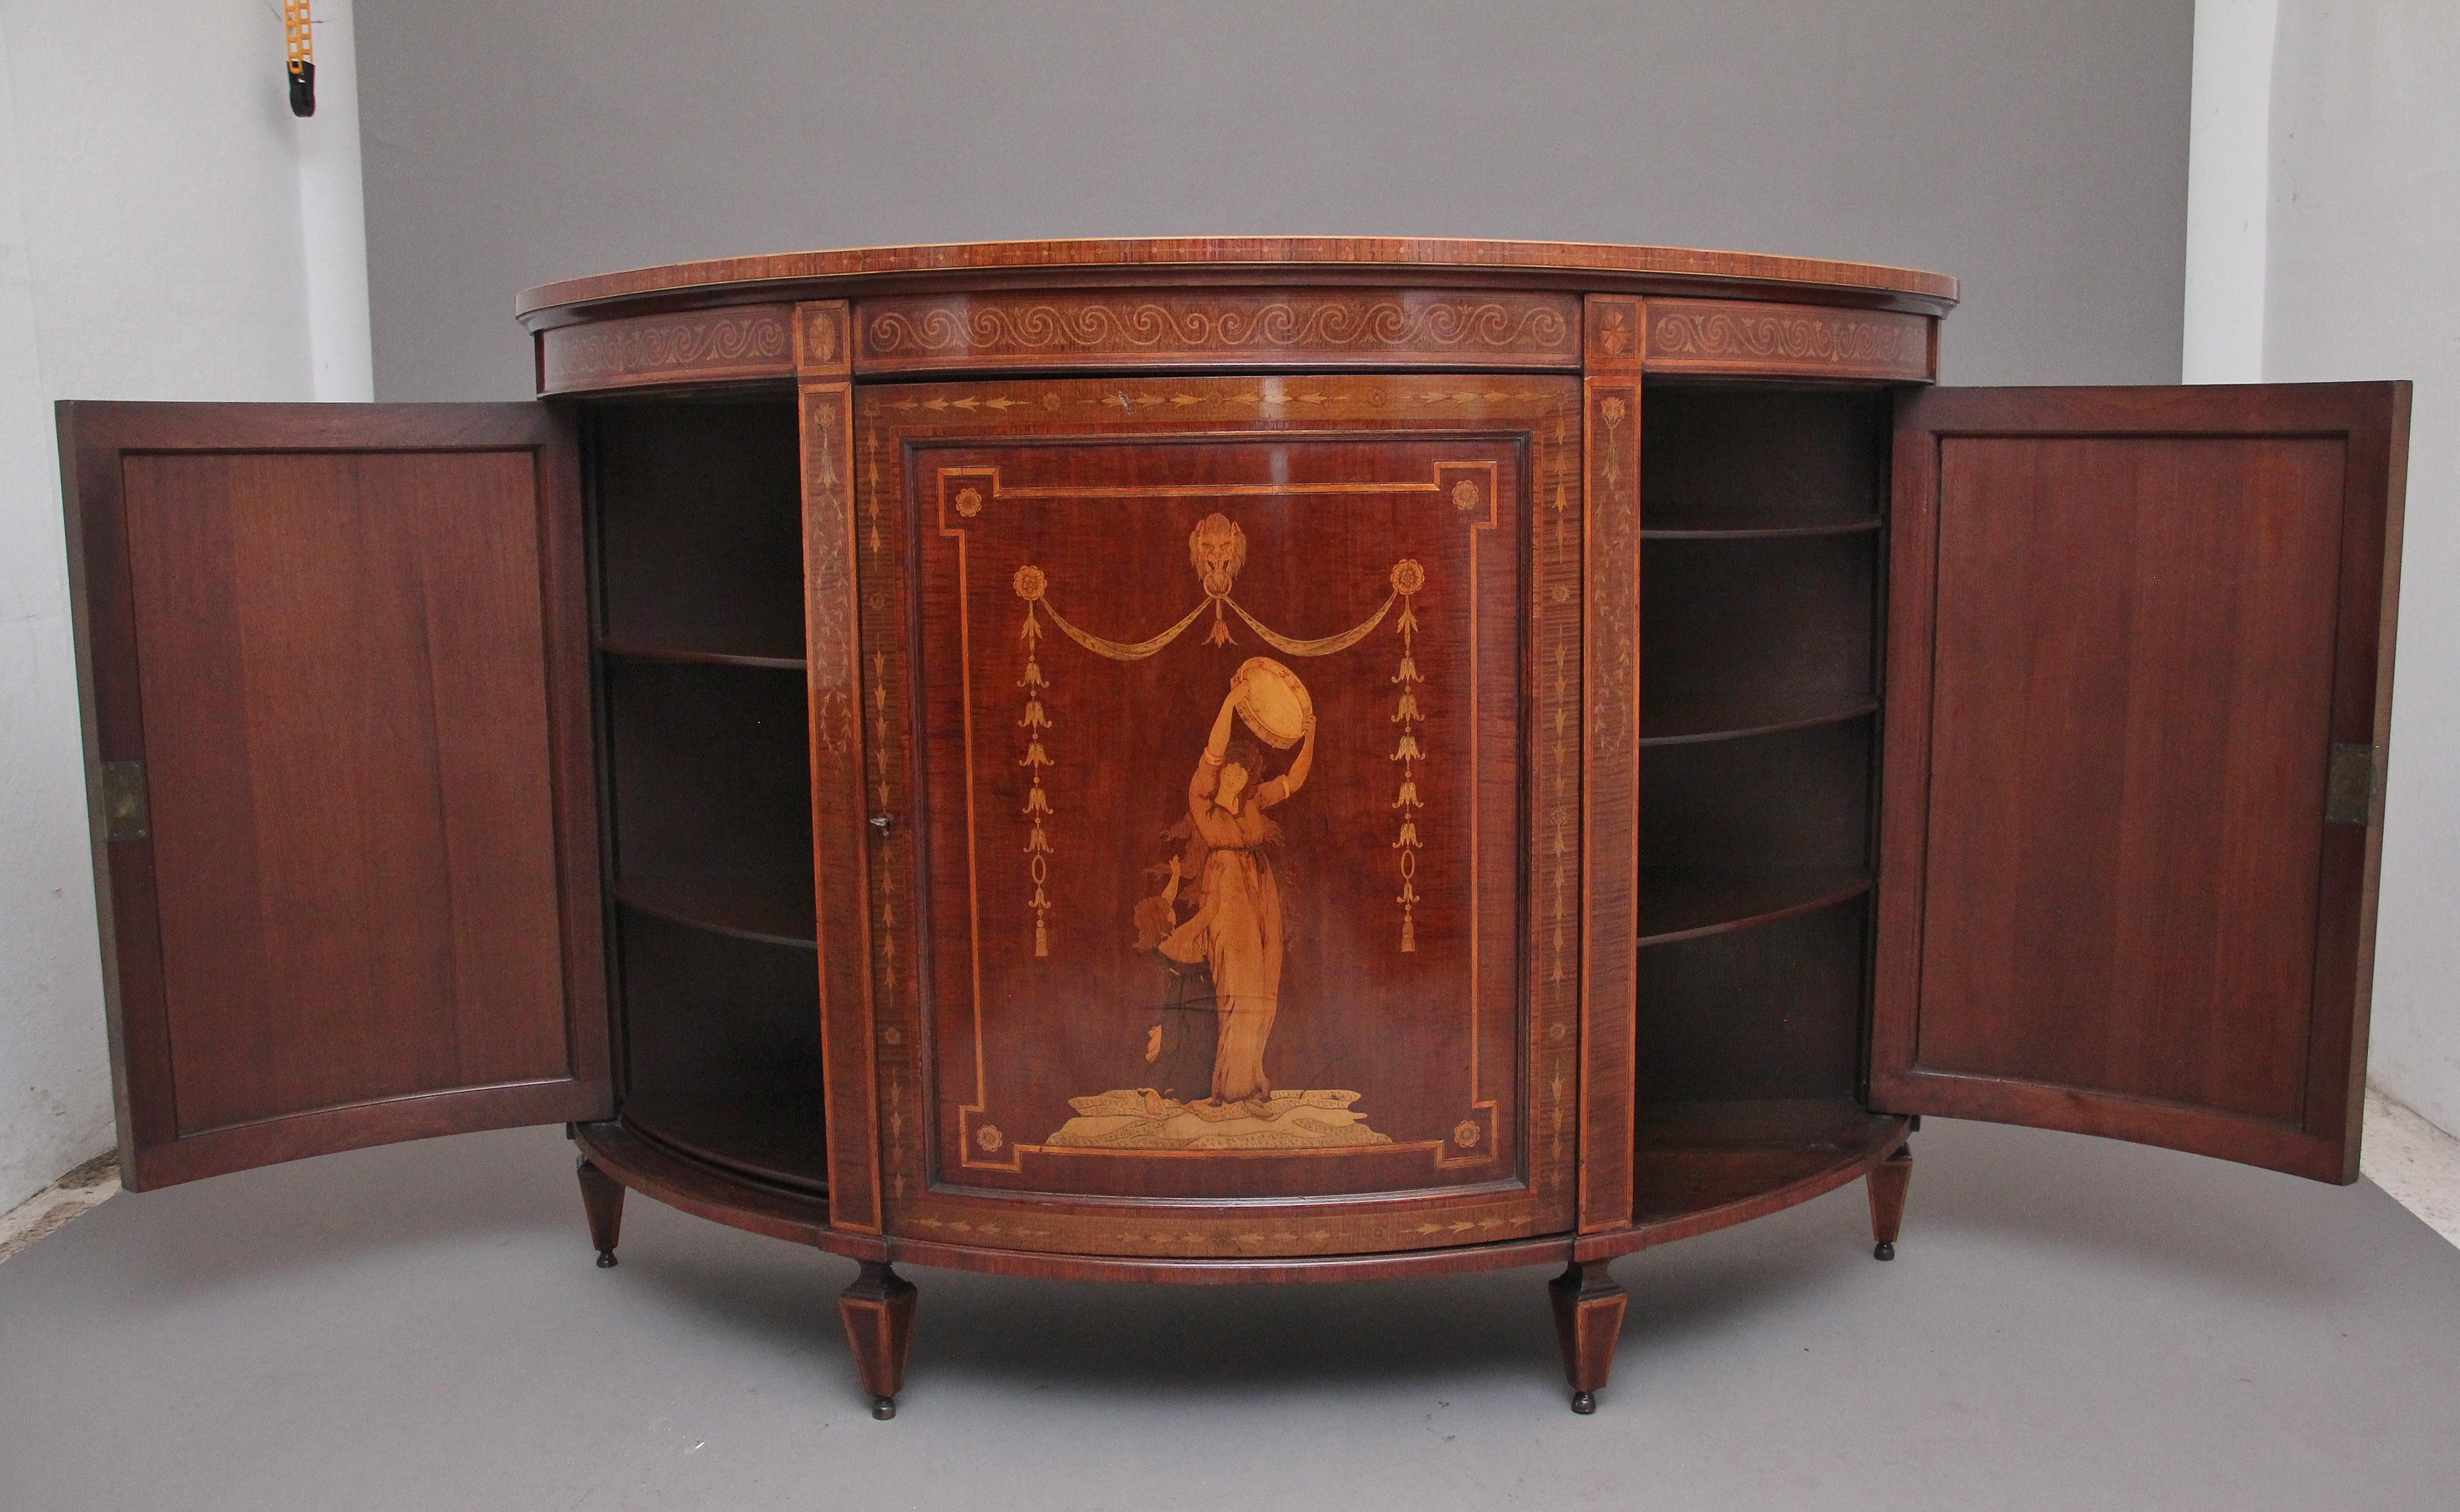 Sheraton Fabulous Quality 19th Century Mahogany and Inlaid Cabinet For Sale